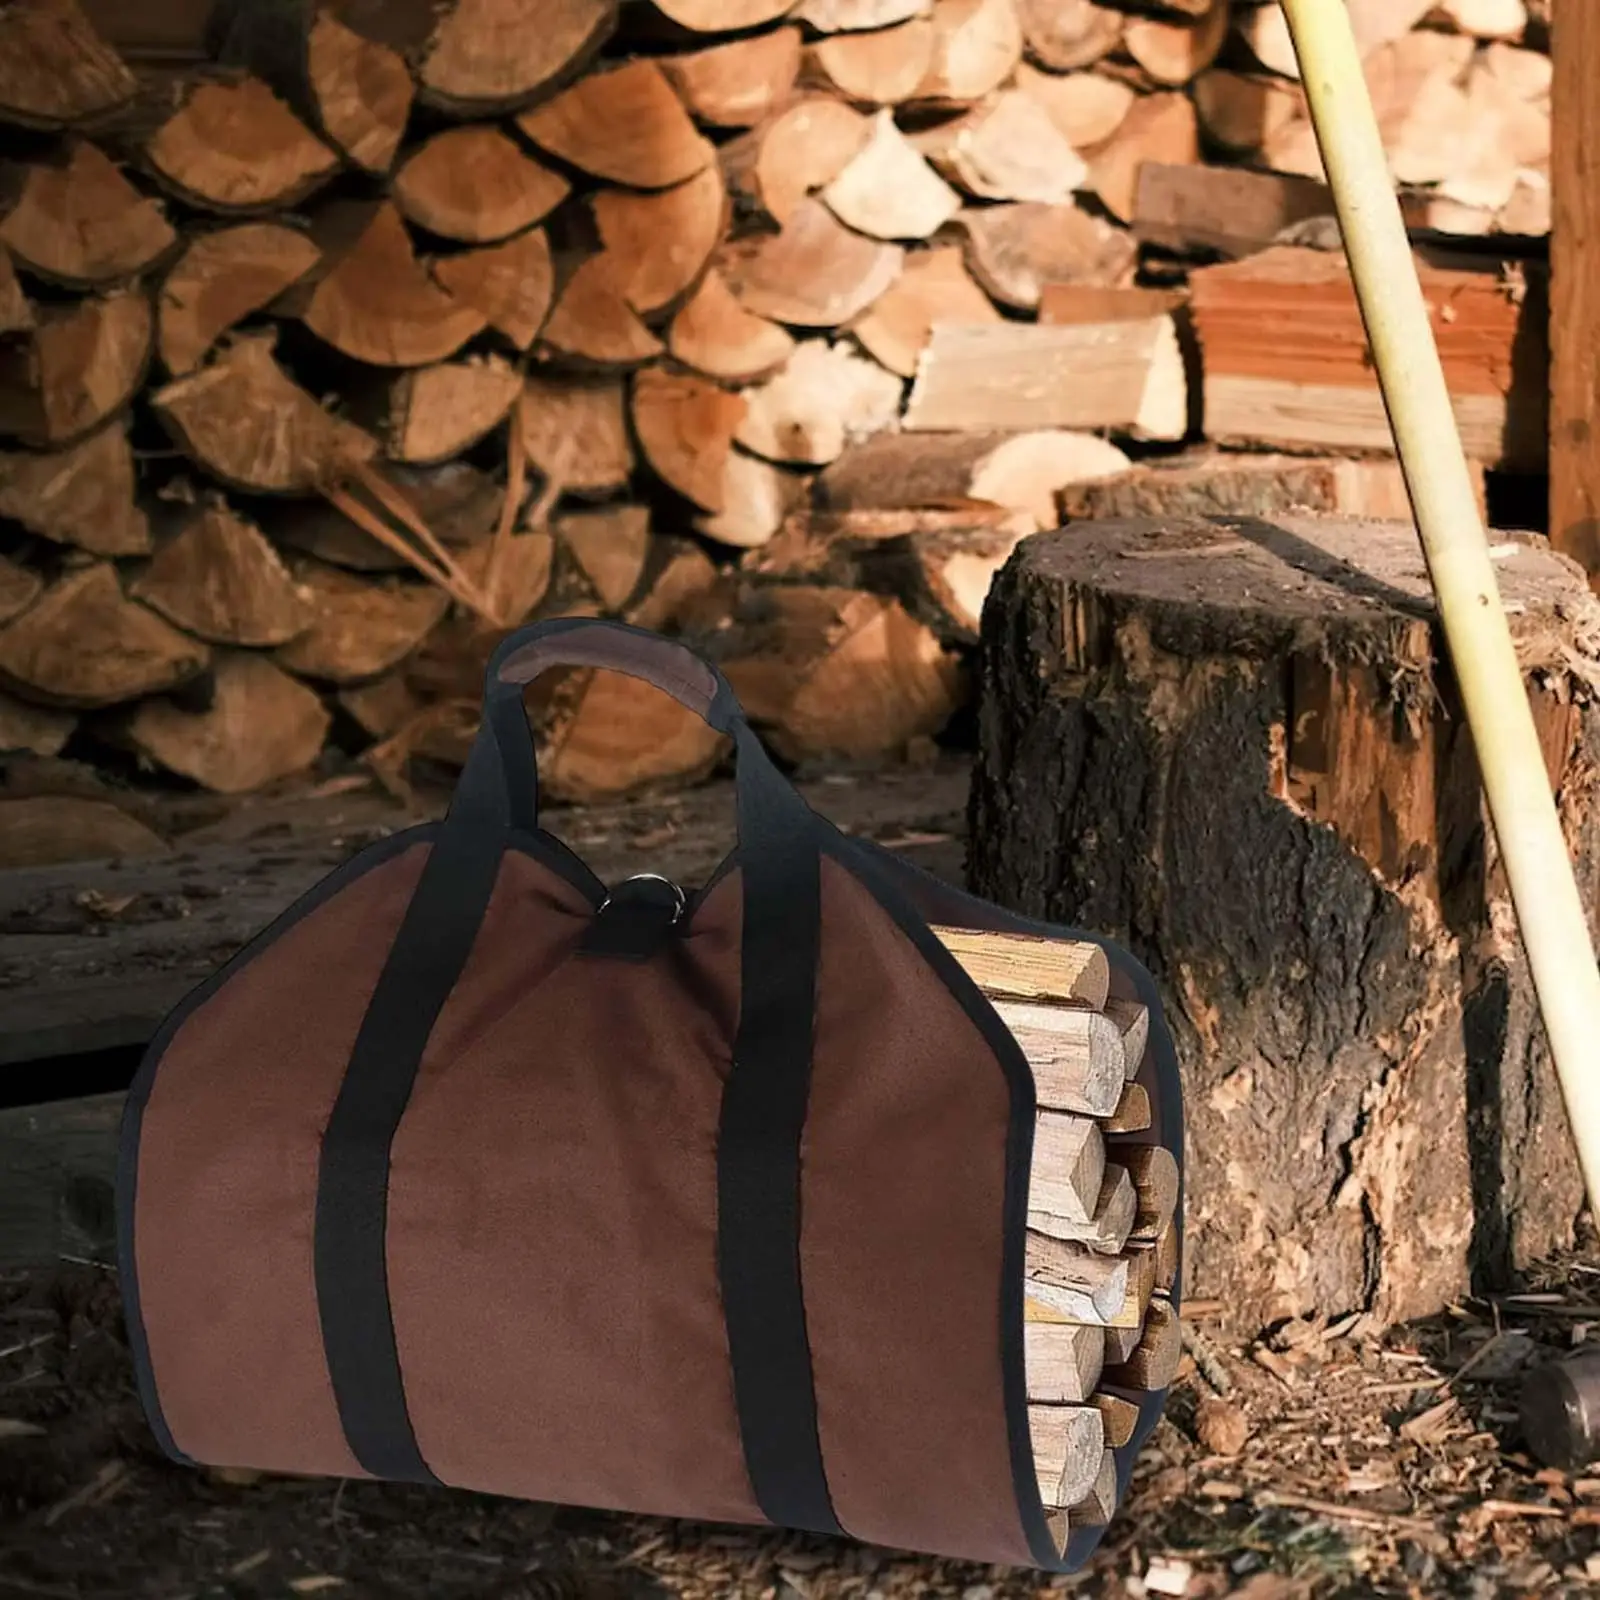 Portable Firewood Carrier Bag Log Tote Handbag Holder Rack Fireplace Fire Wood Large Capacity for Barbecue Fire Pit Picnic BBQ